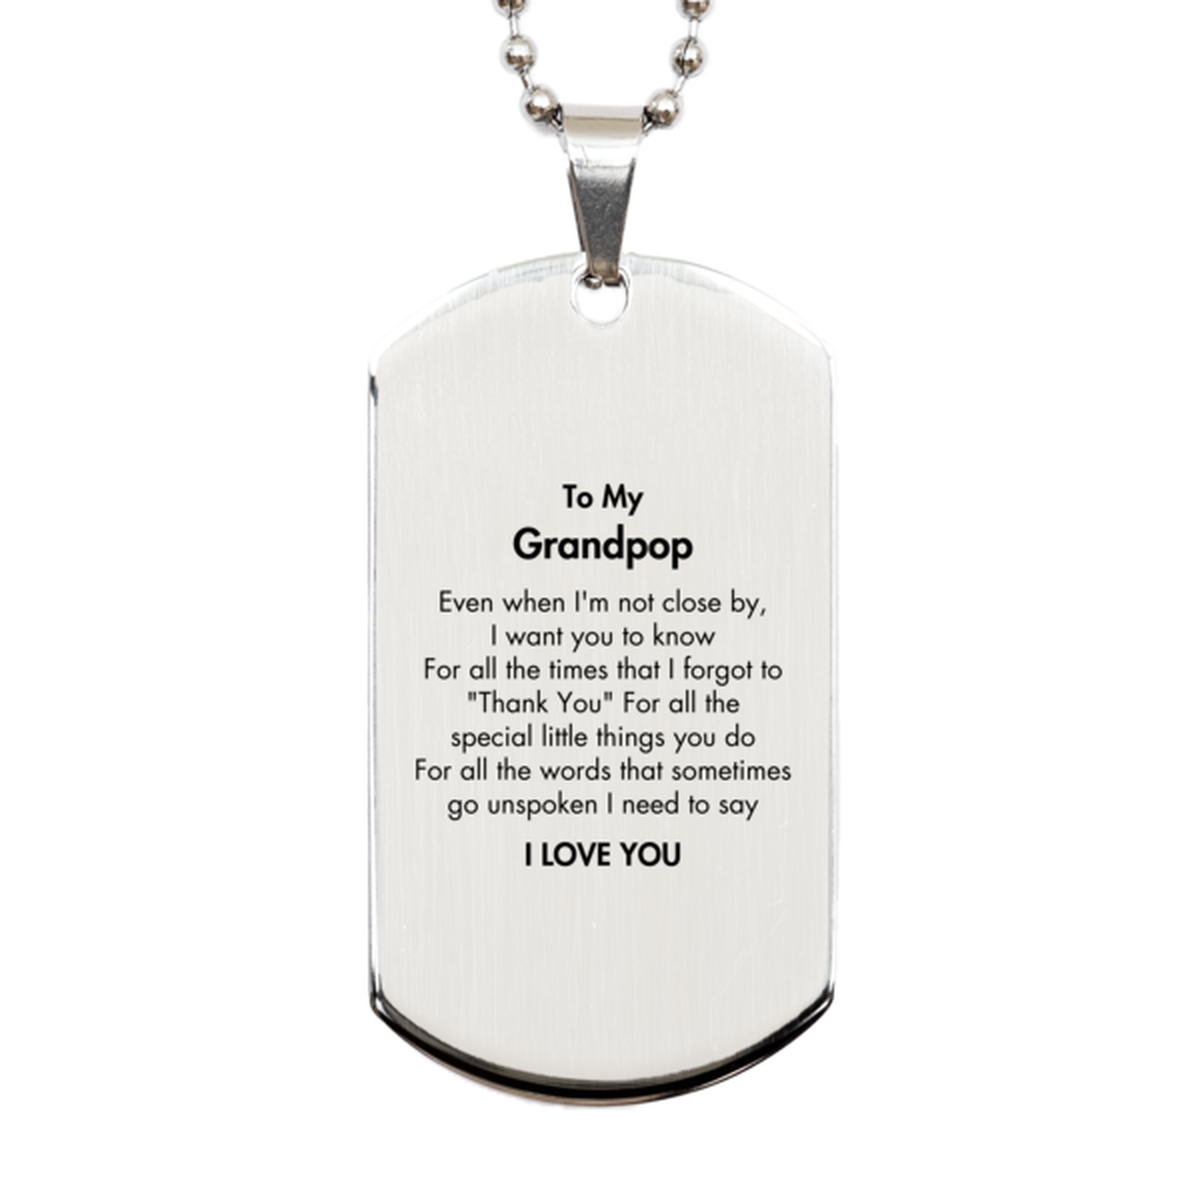 Thank You Gifts for Grandpop, Keepsake Silver Dog Tag Gifts for Grandpop Birthday Mother's day Father's Day Grandpop For all the words That sometimes go unspoken I need to say I LOVE YOU